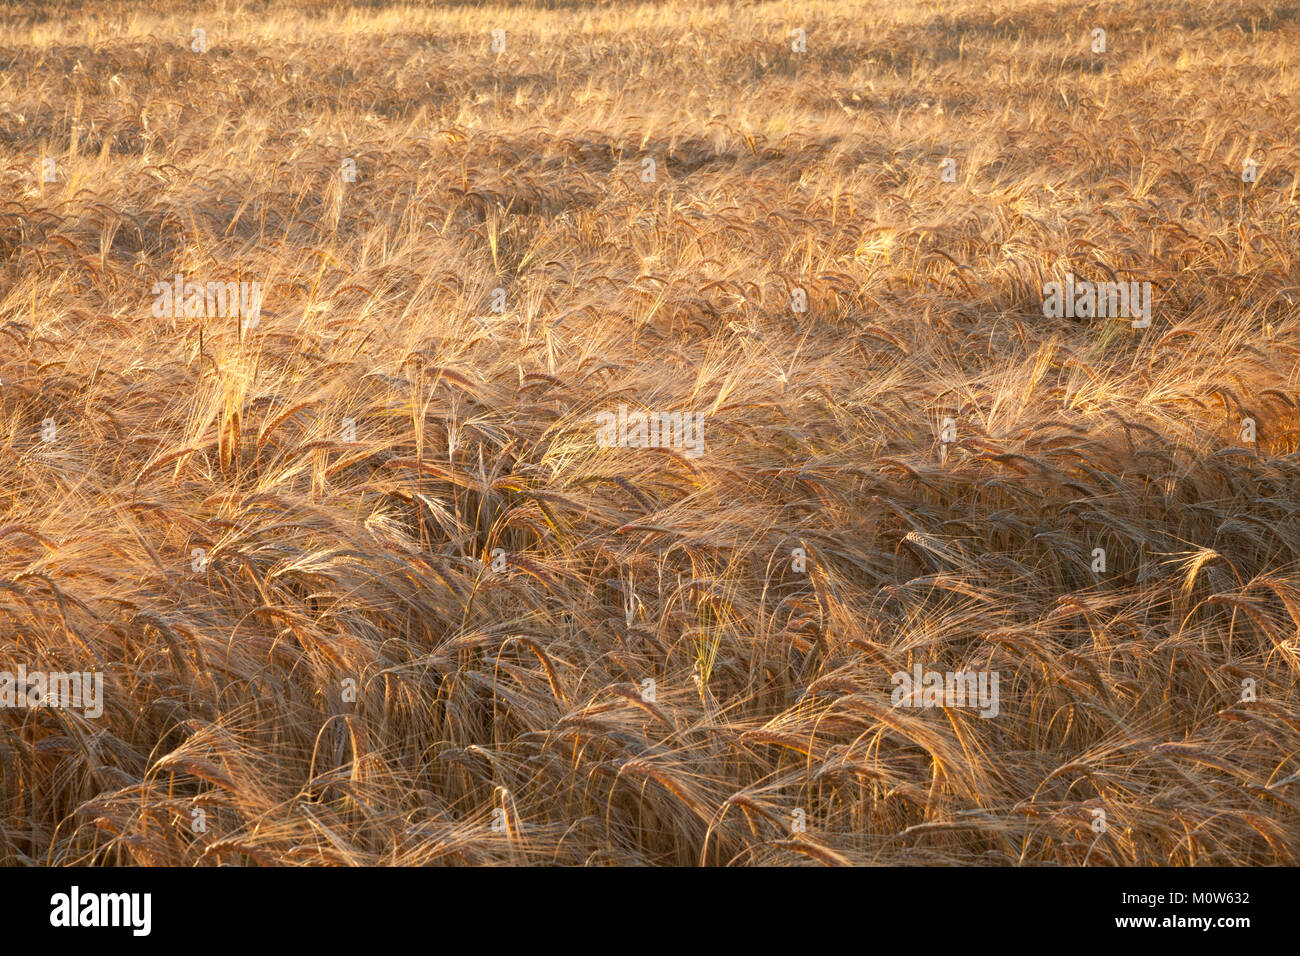 A field of golden barley bathed in warm evening sunlight near Church Brampton in Northamptonshire, England. Stock Photo